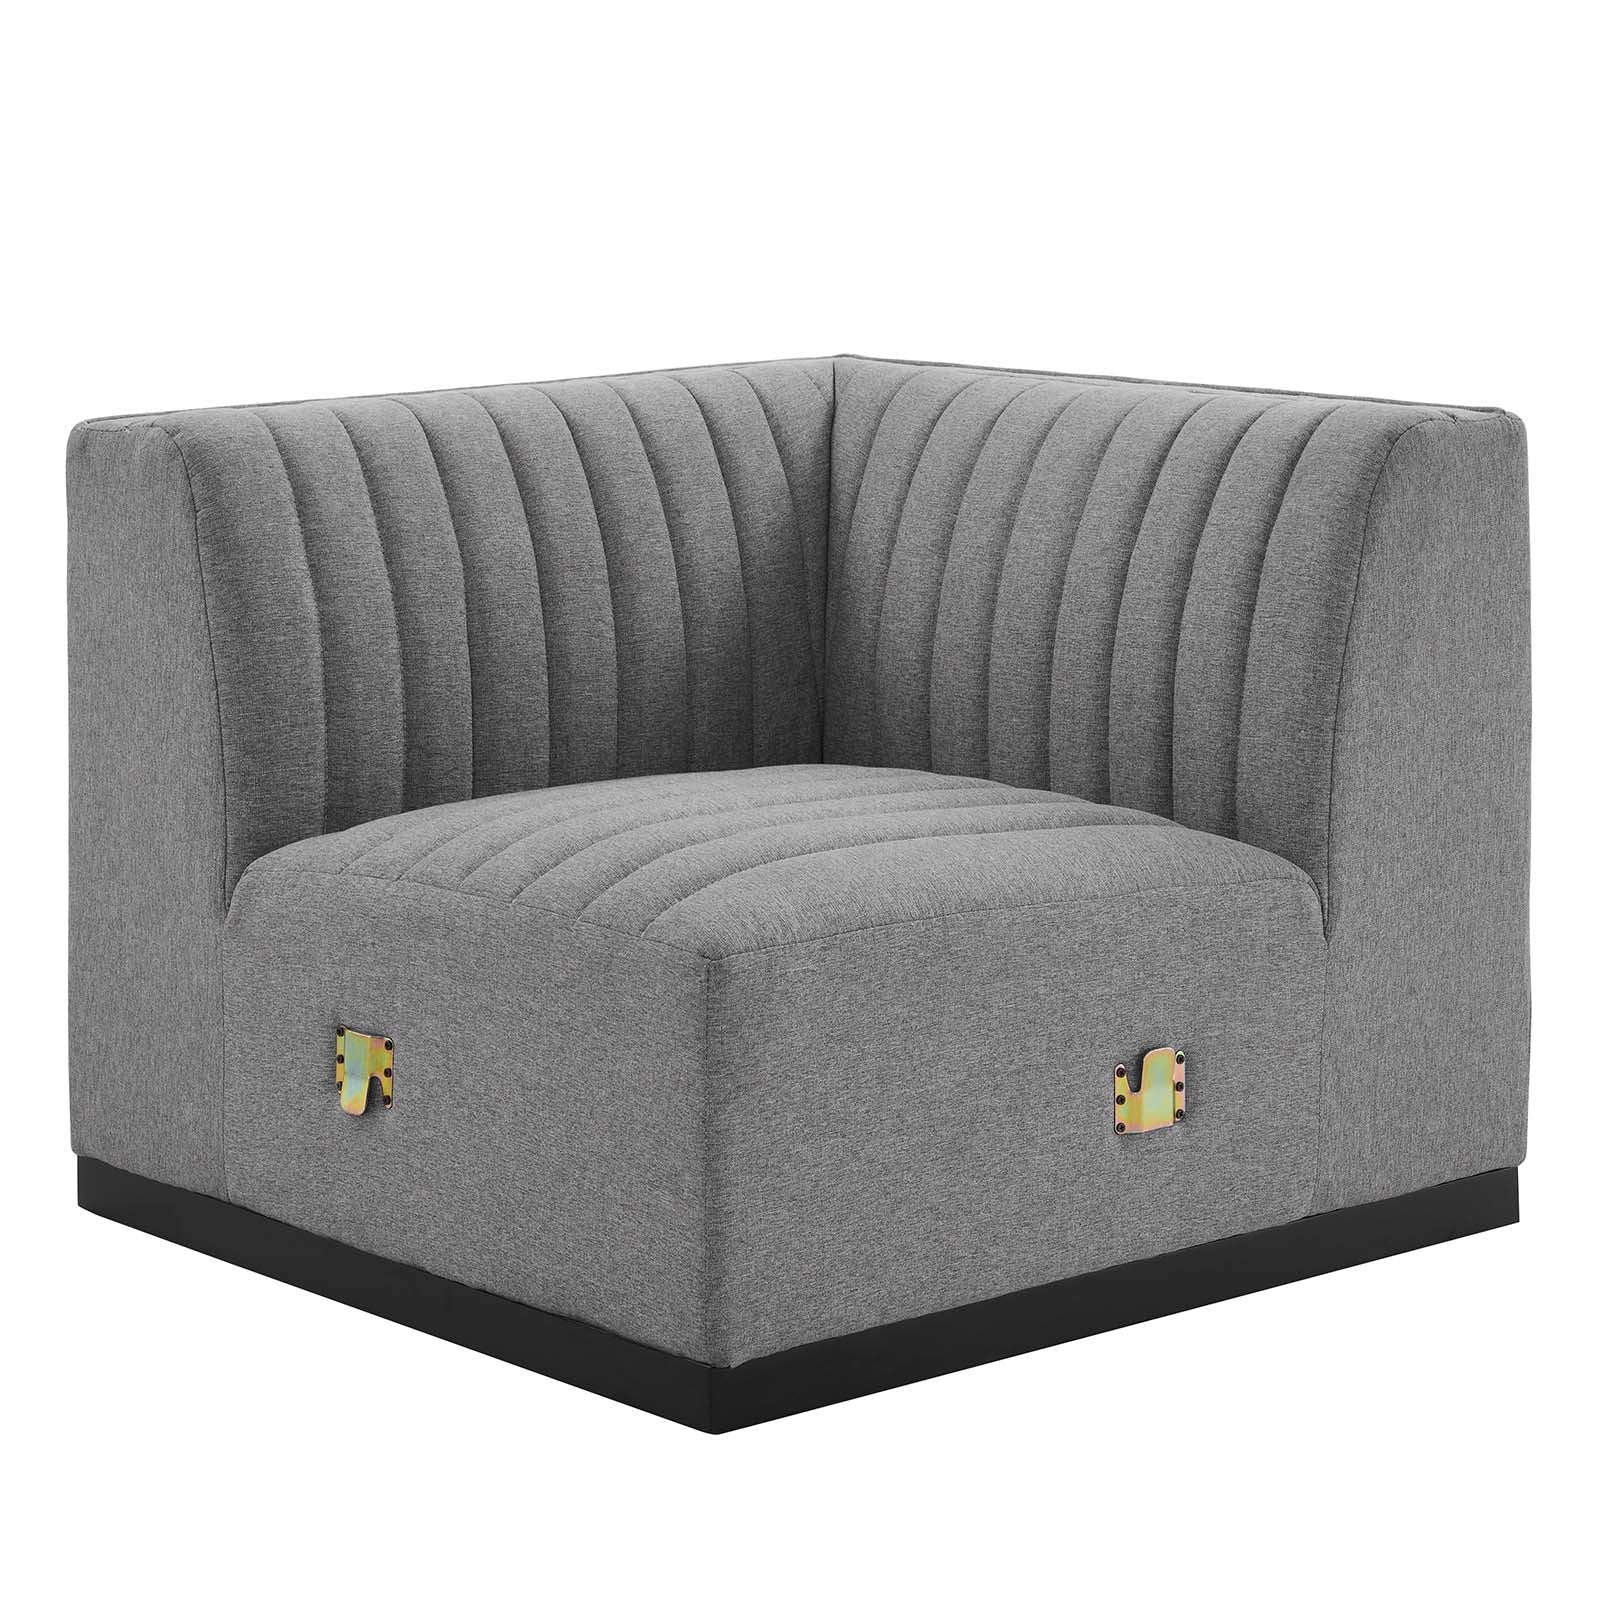 Modway Accent Chairs - Conjure Channel Tufted Upholstered Fabric Left Corner Chair Black Light Gray